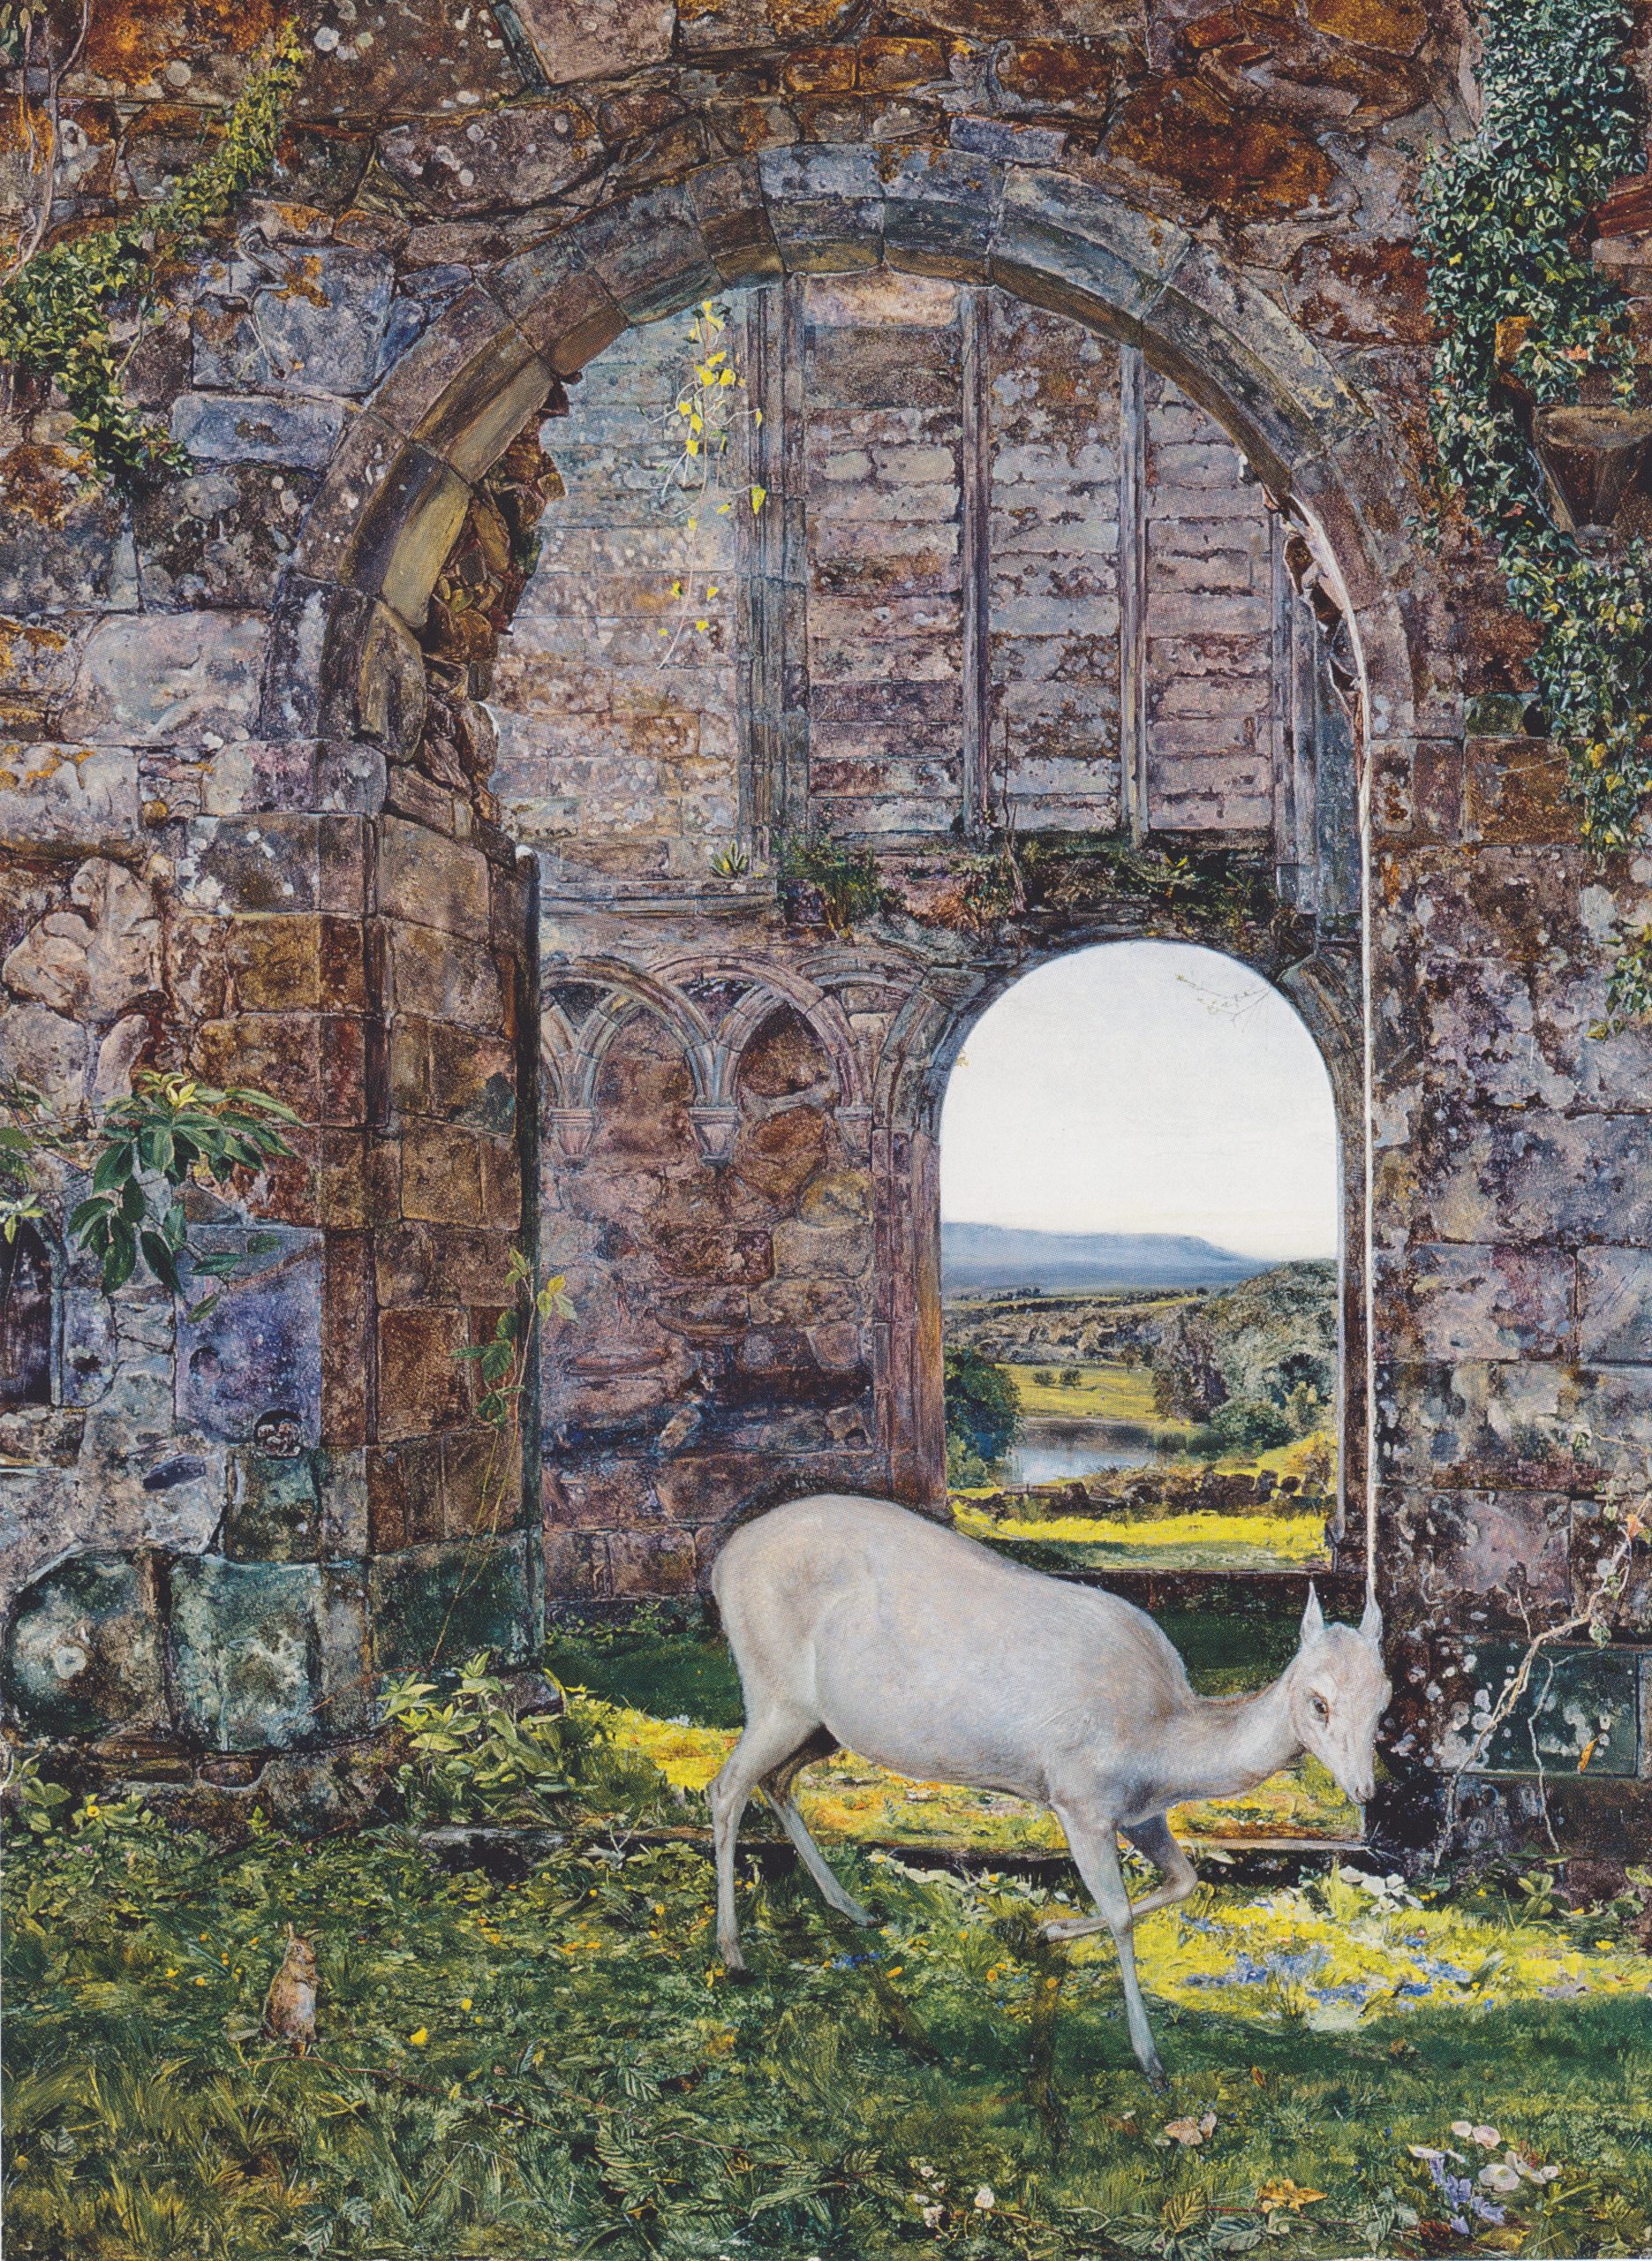 A doe stands on a pathway beneath an archway which leads to a corridor of grassy hillsides.